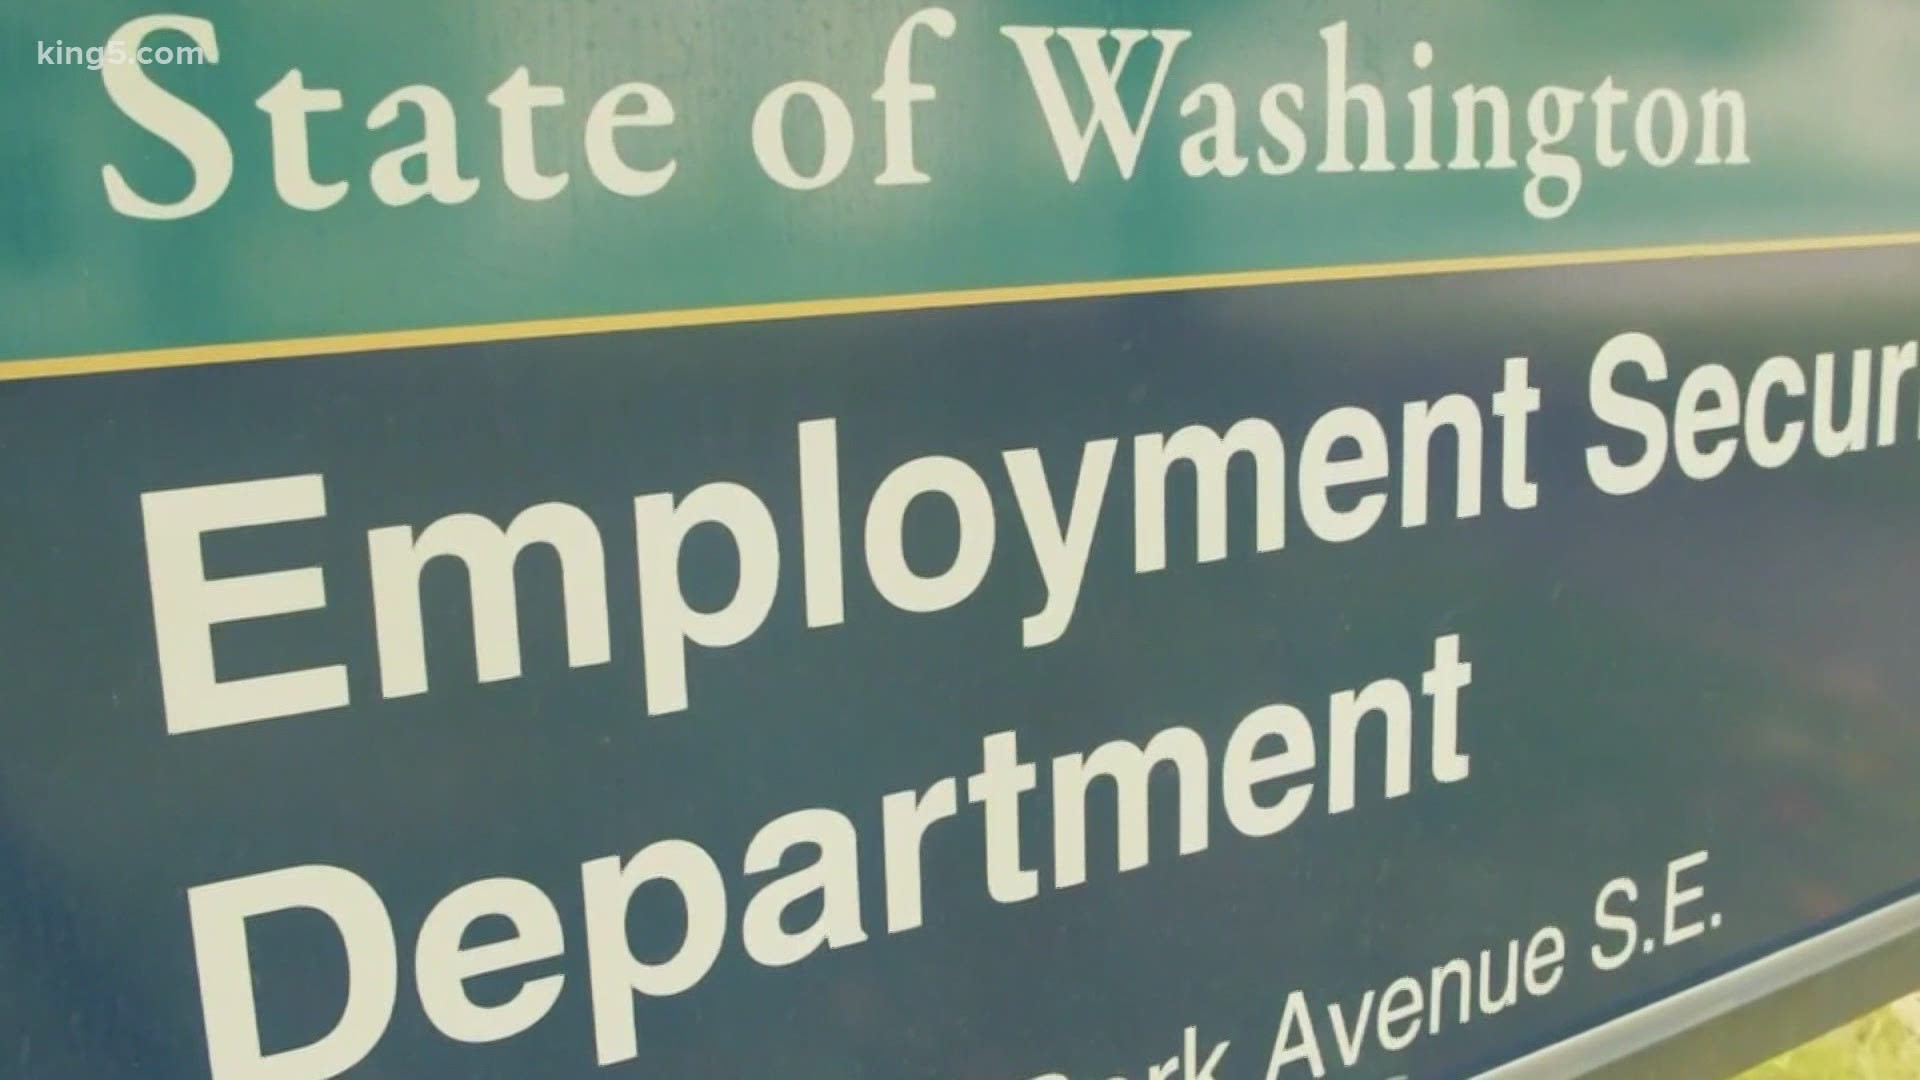 The Washington state auditor said those potentially affected include people who filed for unemployment benefits from Jan. 1 to Dec. 10, 2020.